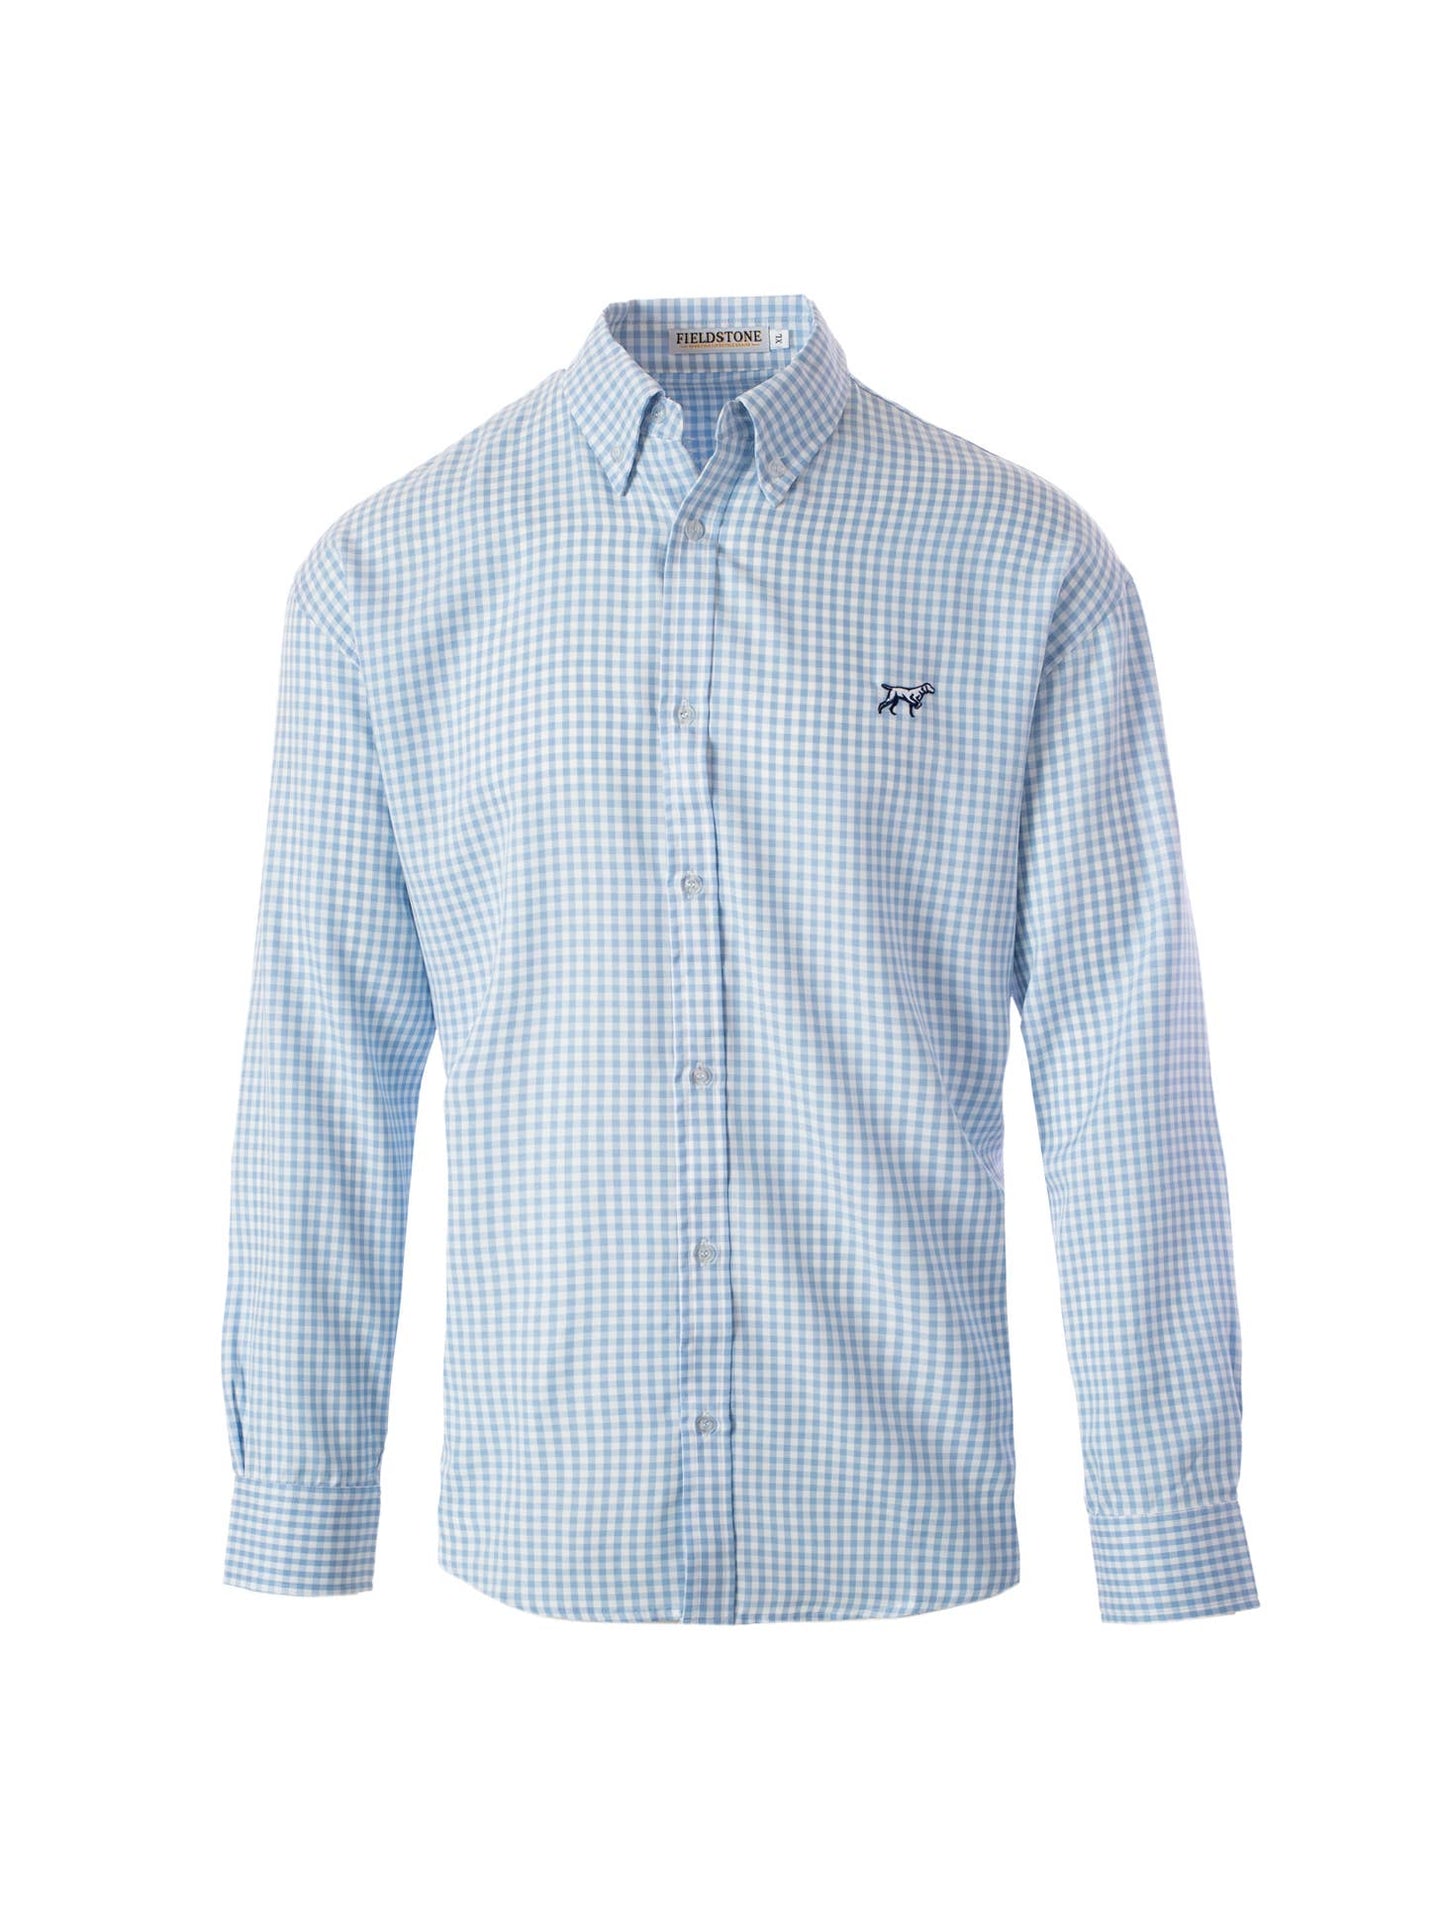 A Fieldstone Outdoor Provisions Co. L/S Braxton Button Down shirt in blue and white check on a white background.